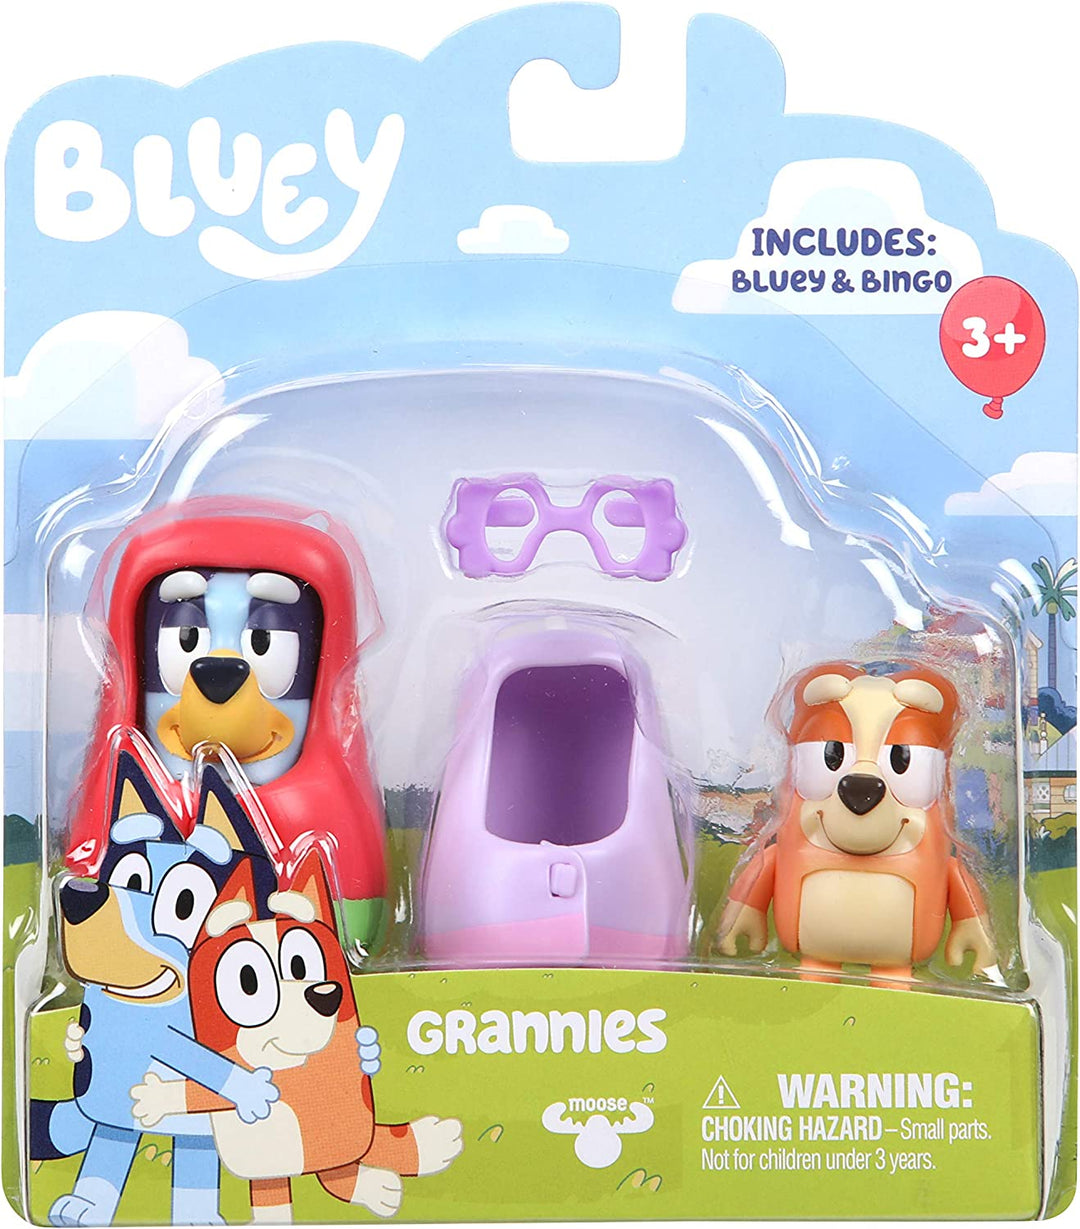 Bluey and Bingo Grannies Playset: Articulated 2.5 Inch Action Figures 2-Pack Including 2 Removable Blankets and Glasses Official Collectable Toy